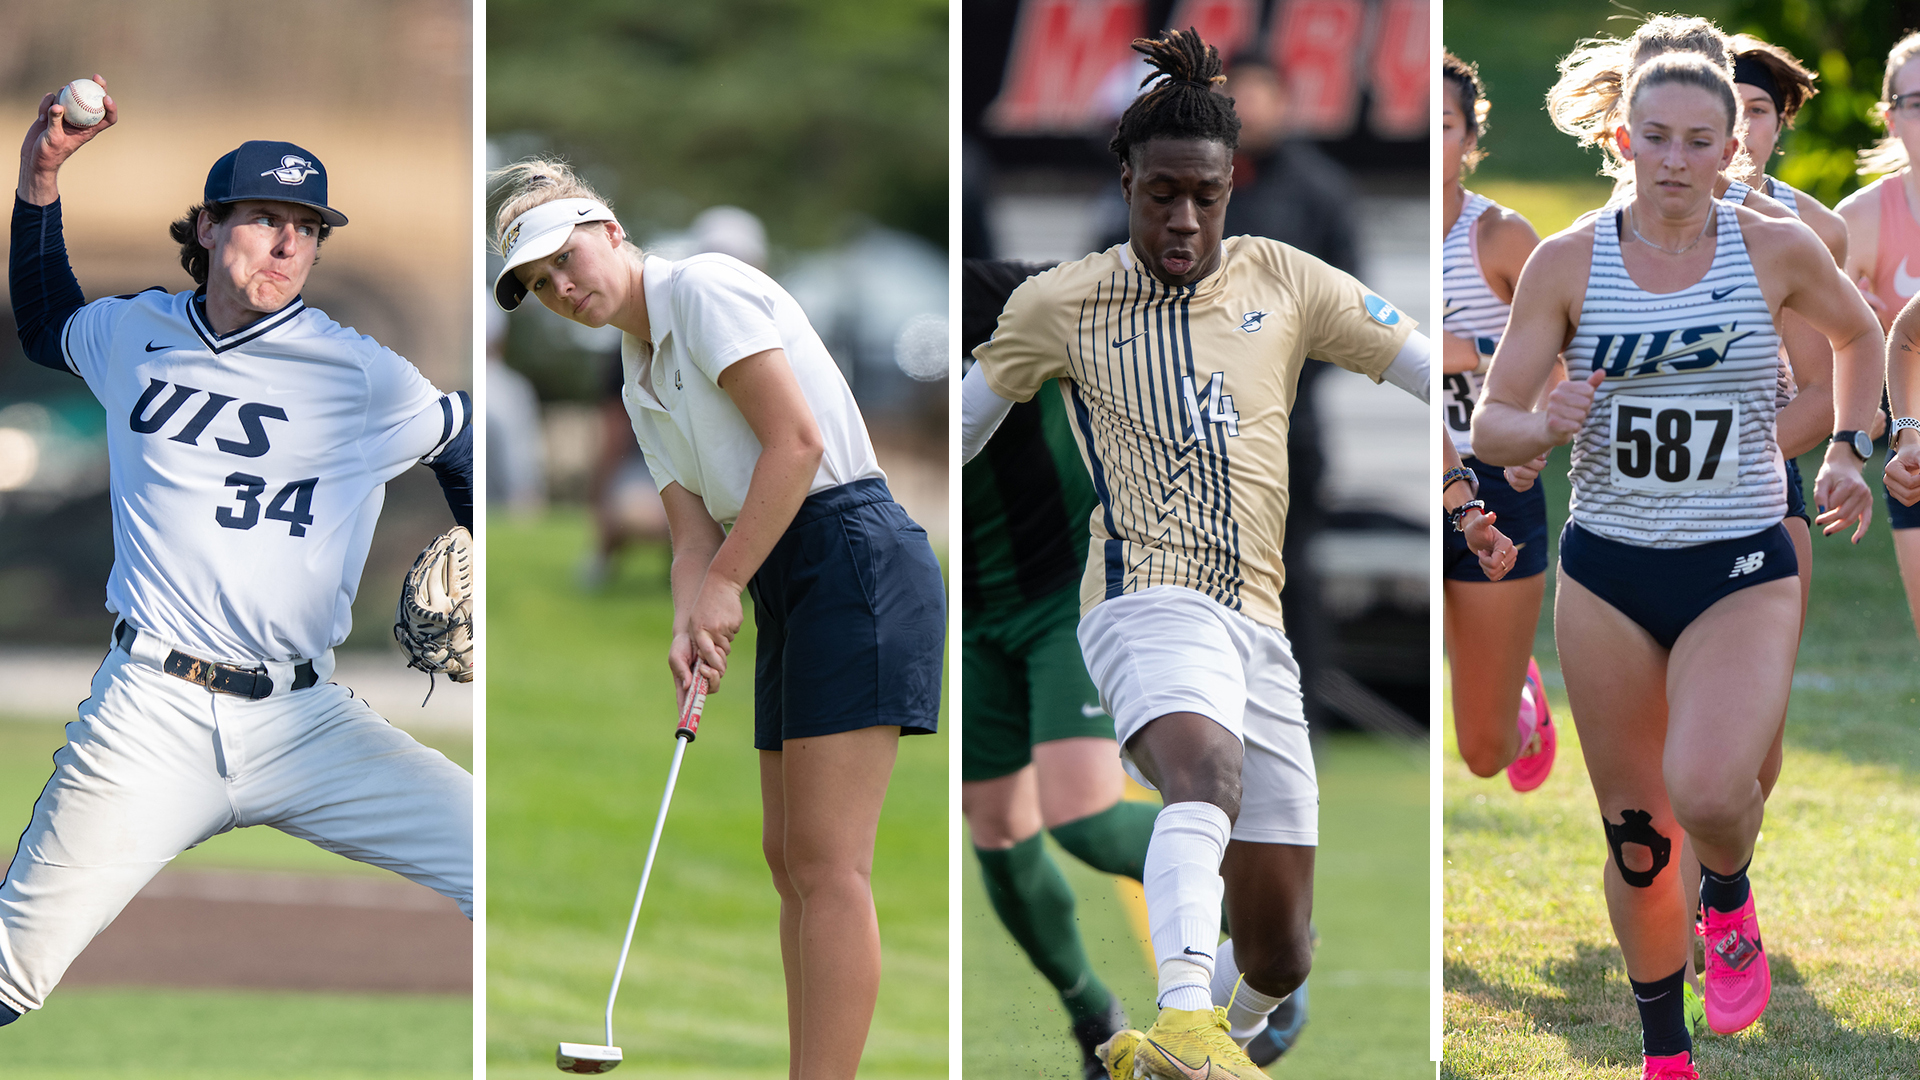 Photos of UIS students playing baseball, golf, soccer and cross country